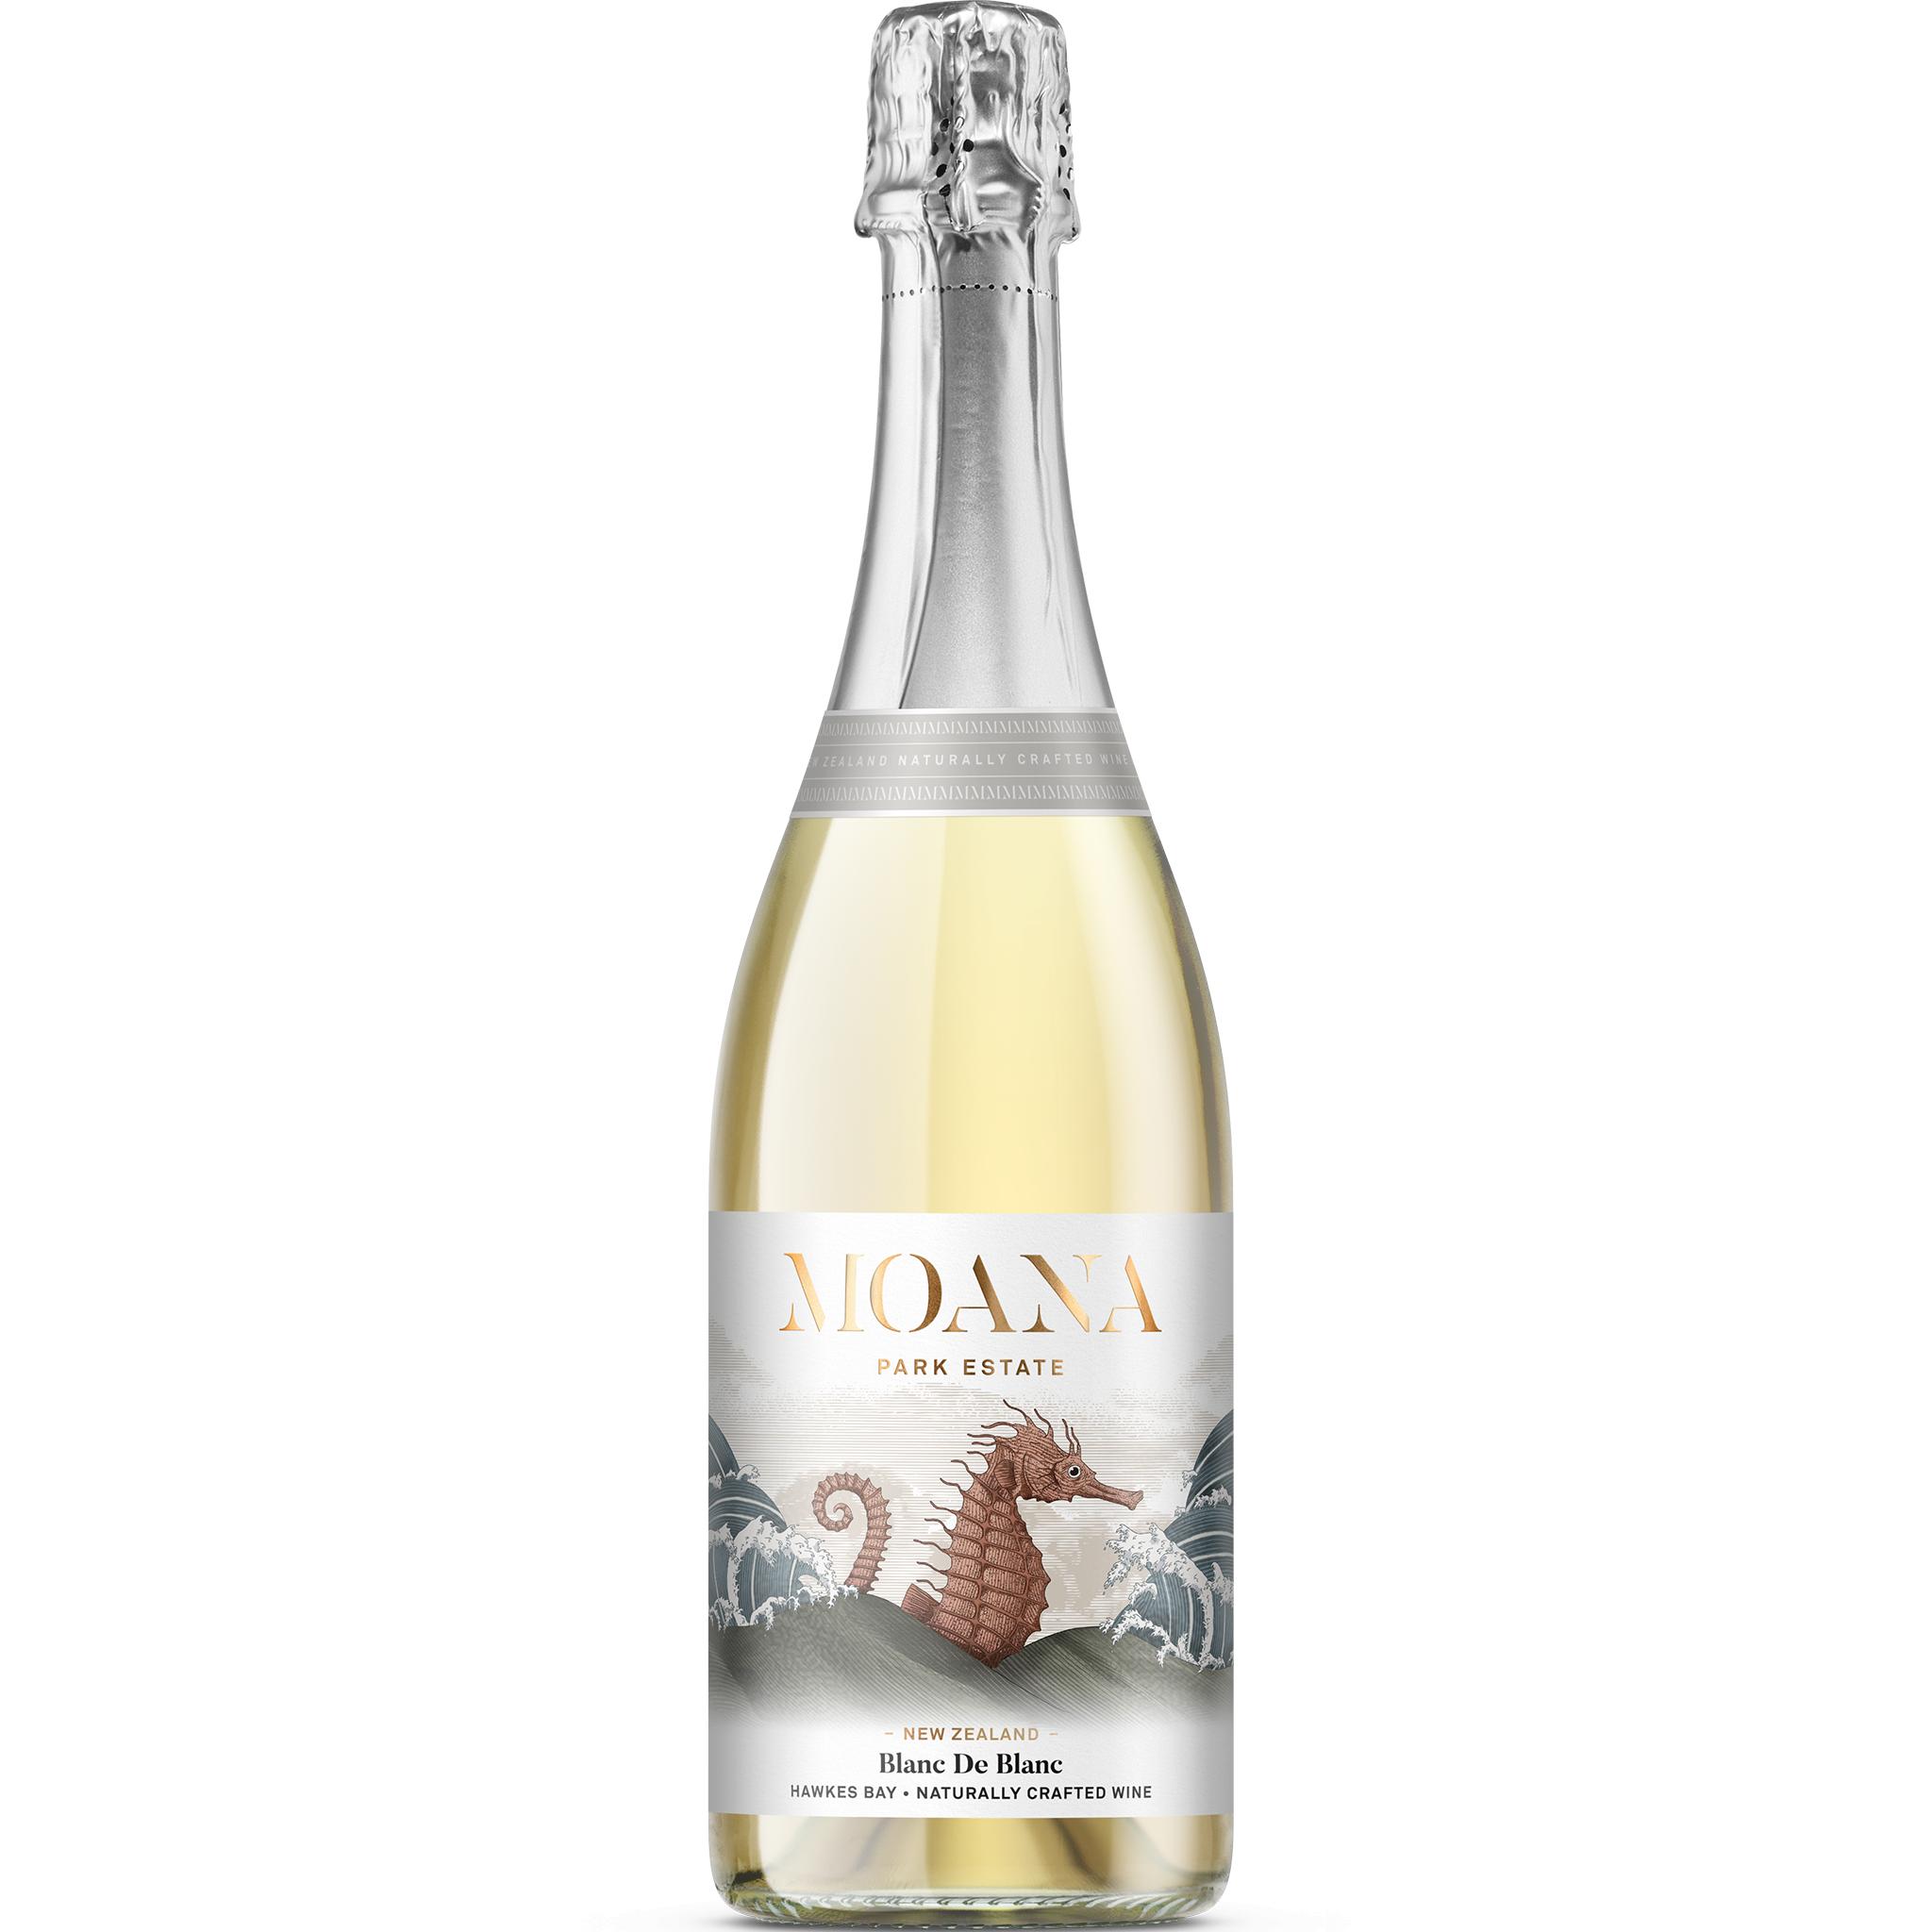 product image for Moana Park Estate Grower's Collection Blanc de Blanc NV | Case of 6